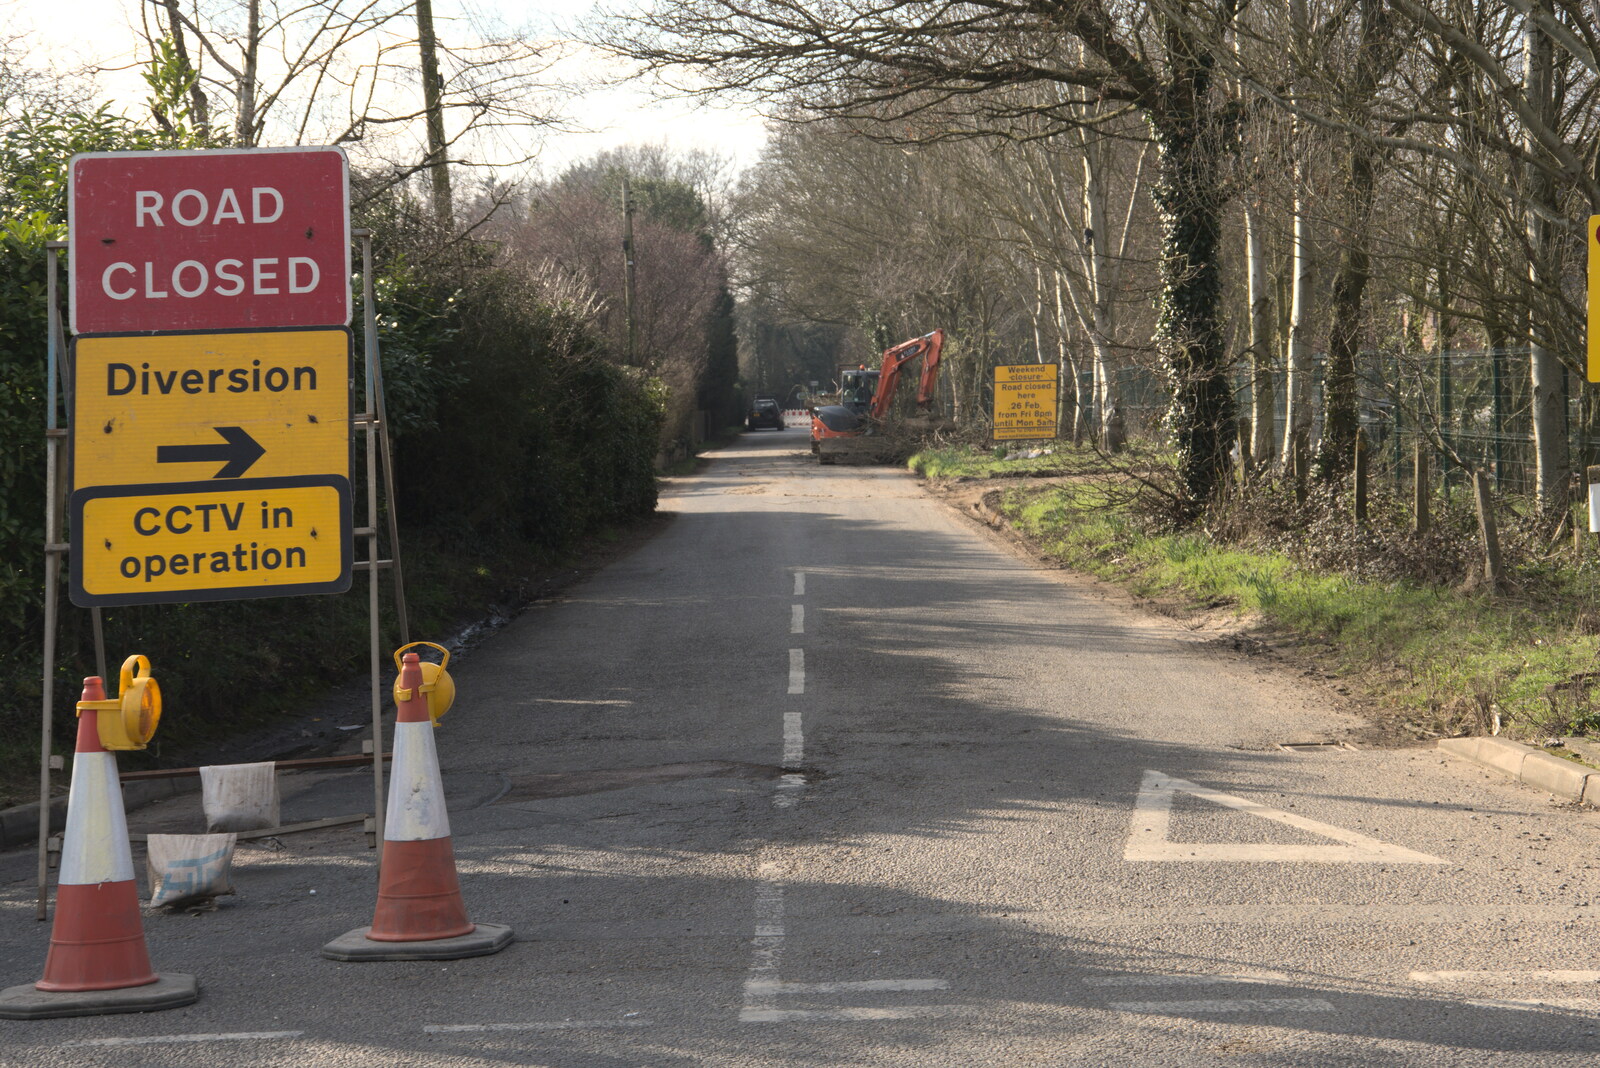 One leg of the Brome Triangle is closed off from Fred's New Bike and an A140 Closure, Brome, Suffolk - 27th February 2021